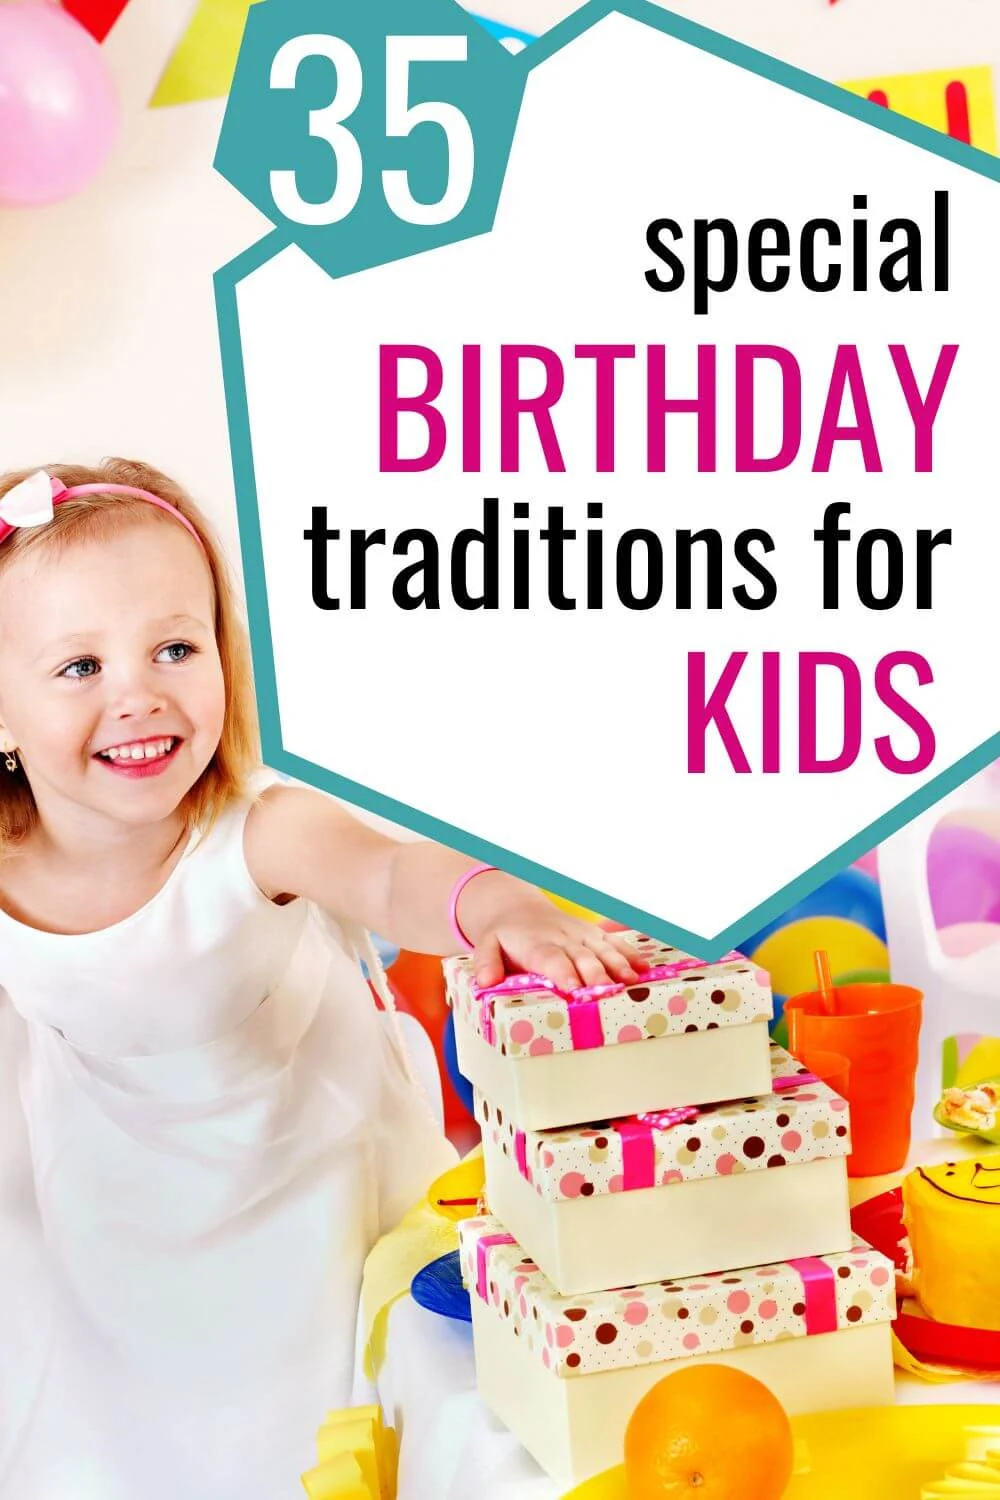 35 special birthday traditions for kids.